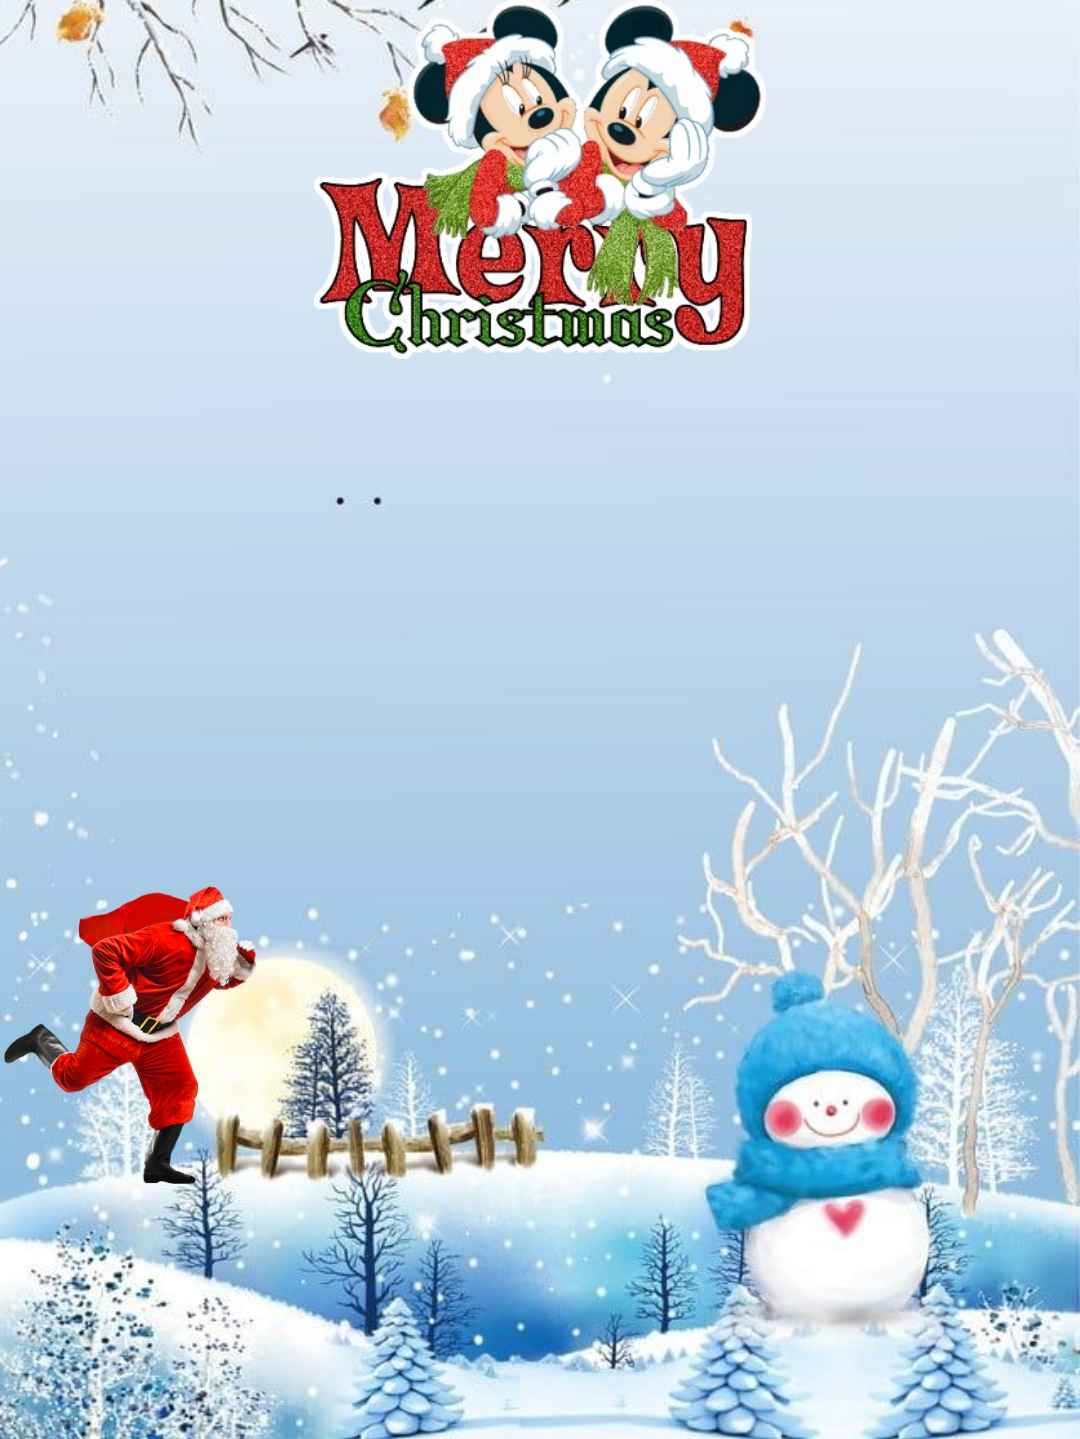 Merry Christmas HD Backgrounds For Editing